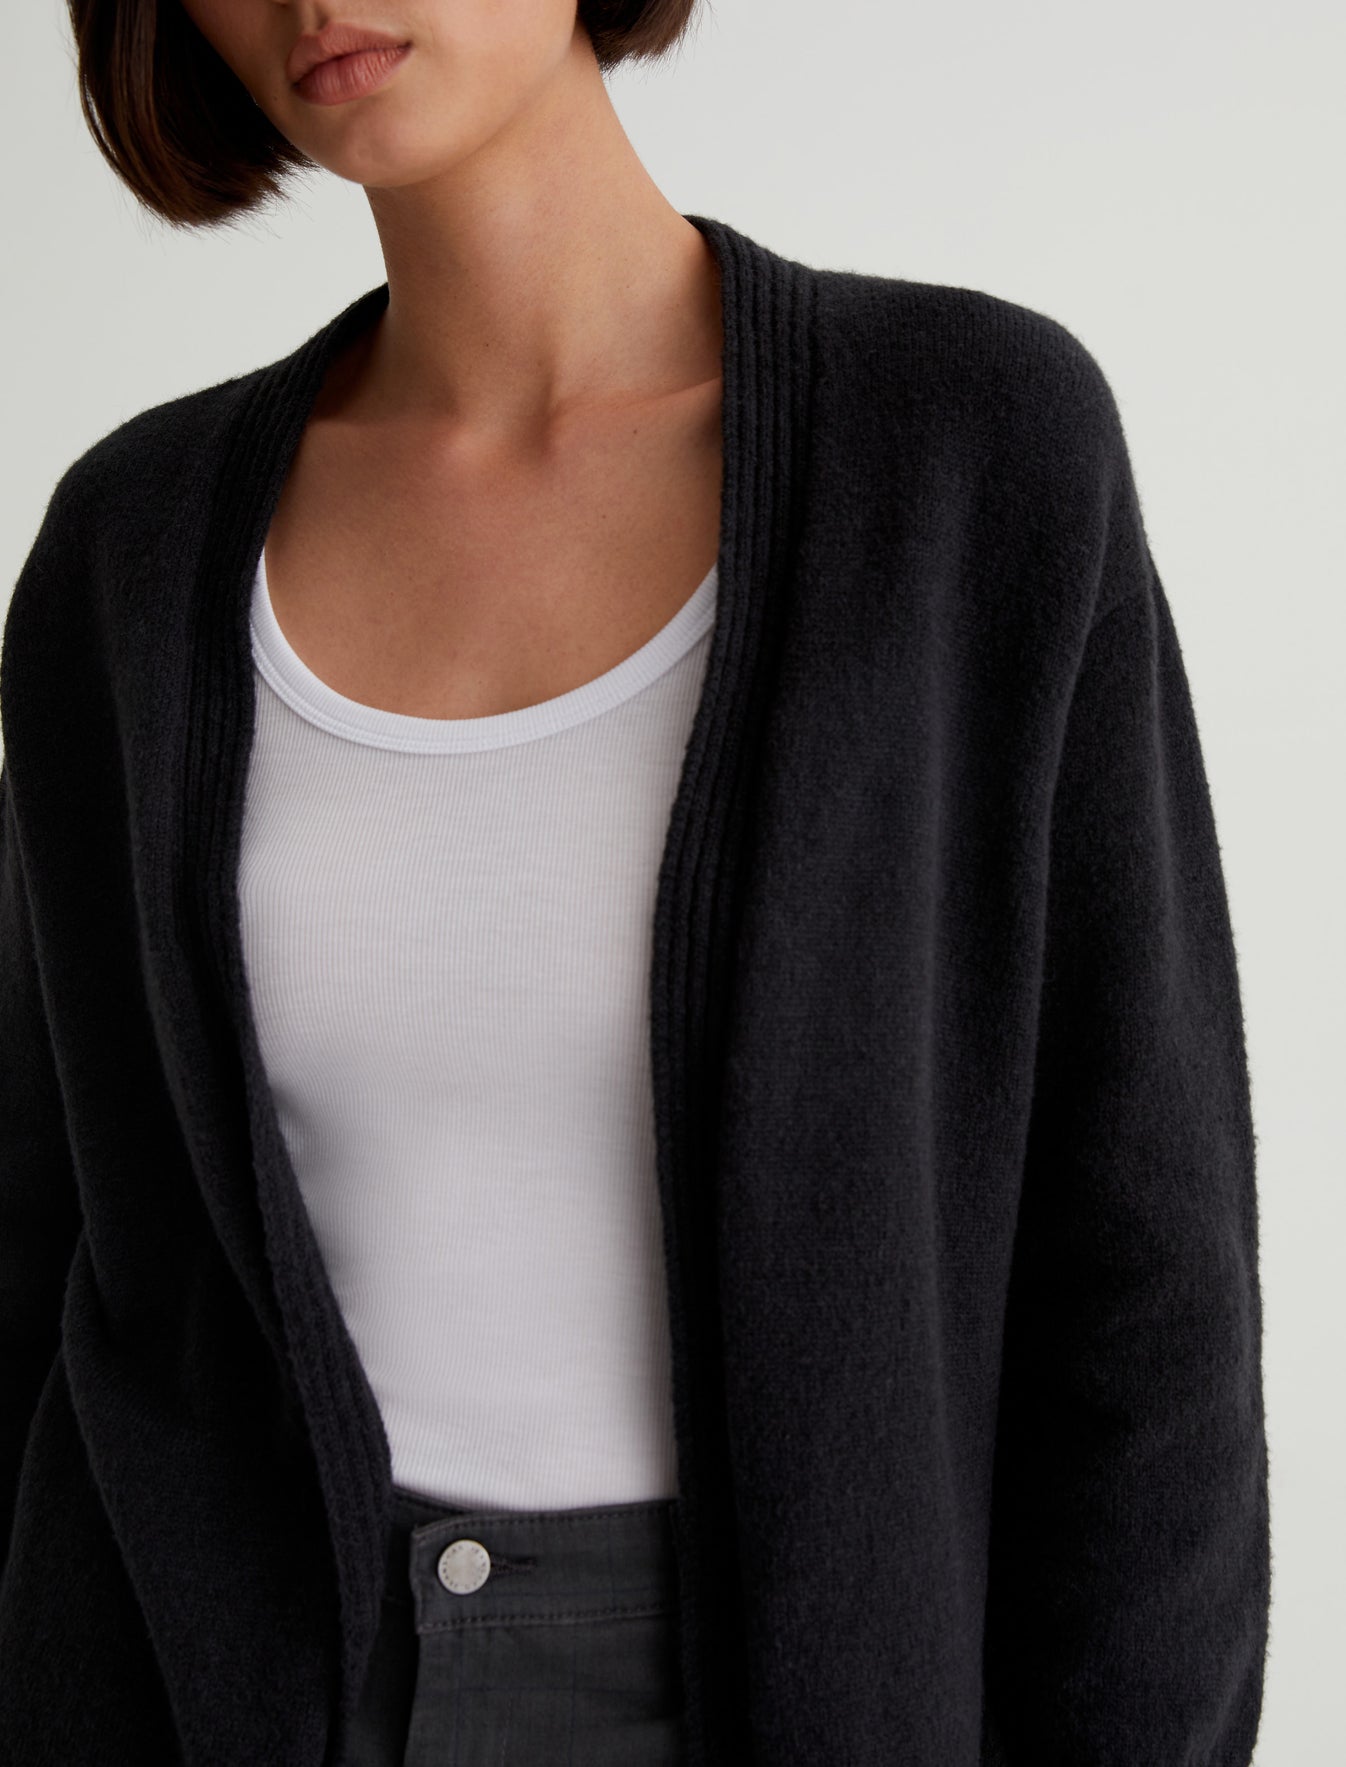 Relaxed Fit Cardigan Long Cardigan Sweaters For Women Long Blazer